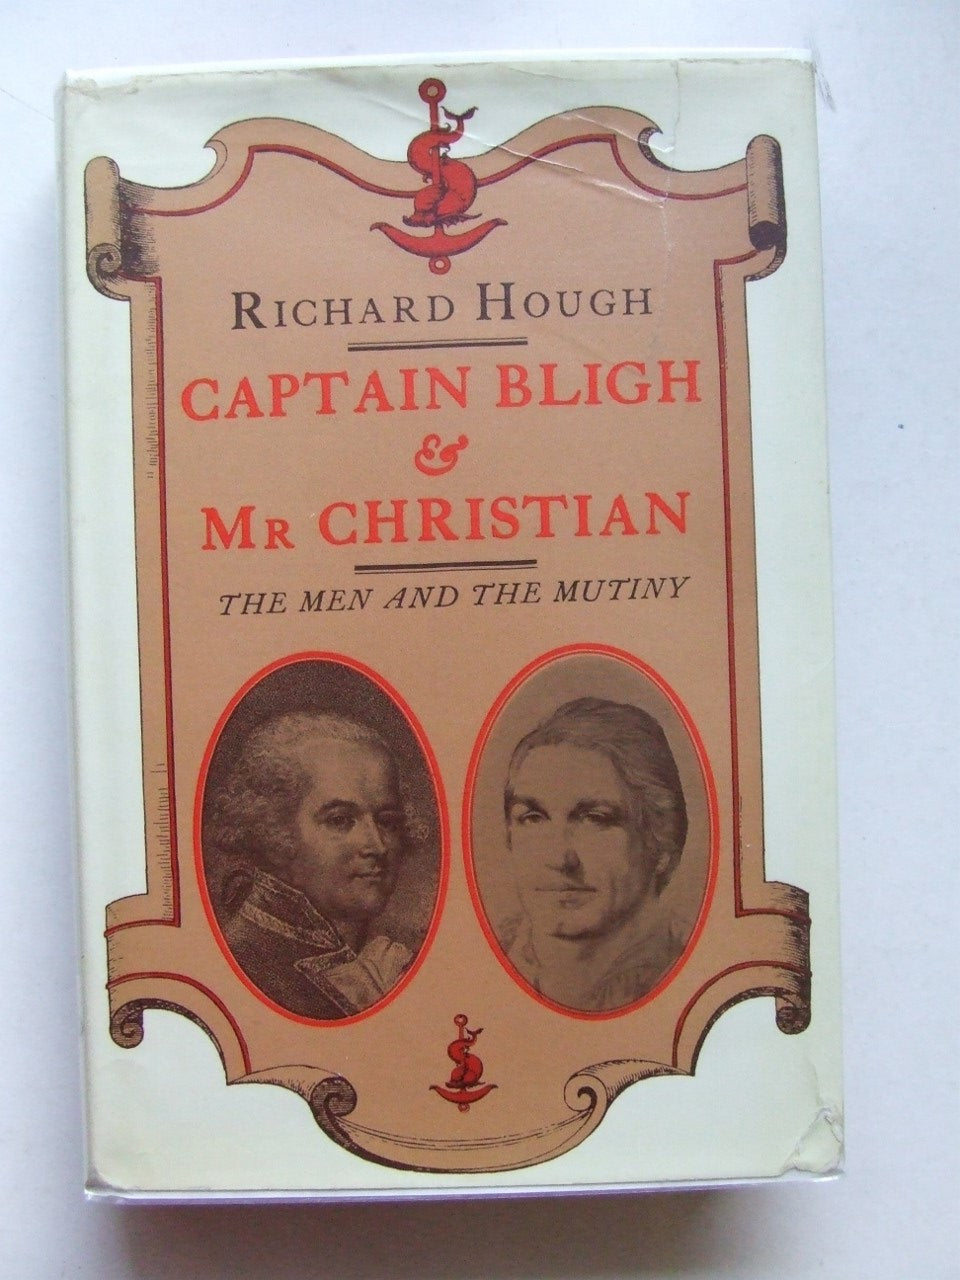 Captain Bligh and Mr. Christian, the men and the mutiny